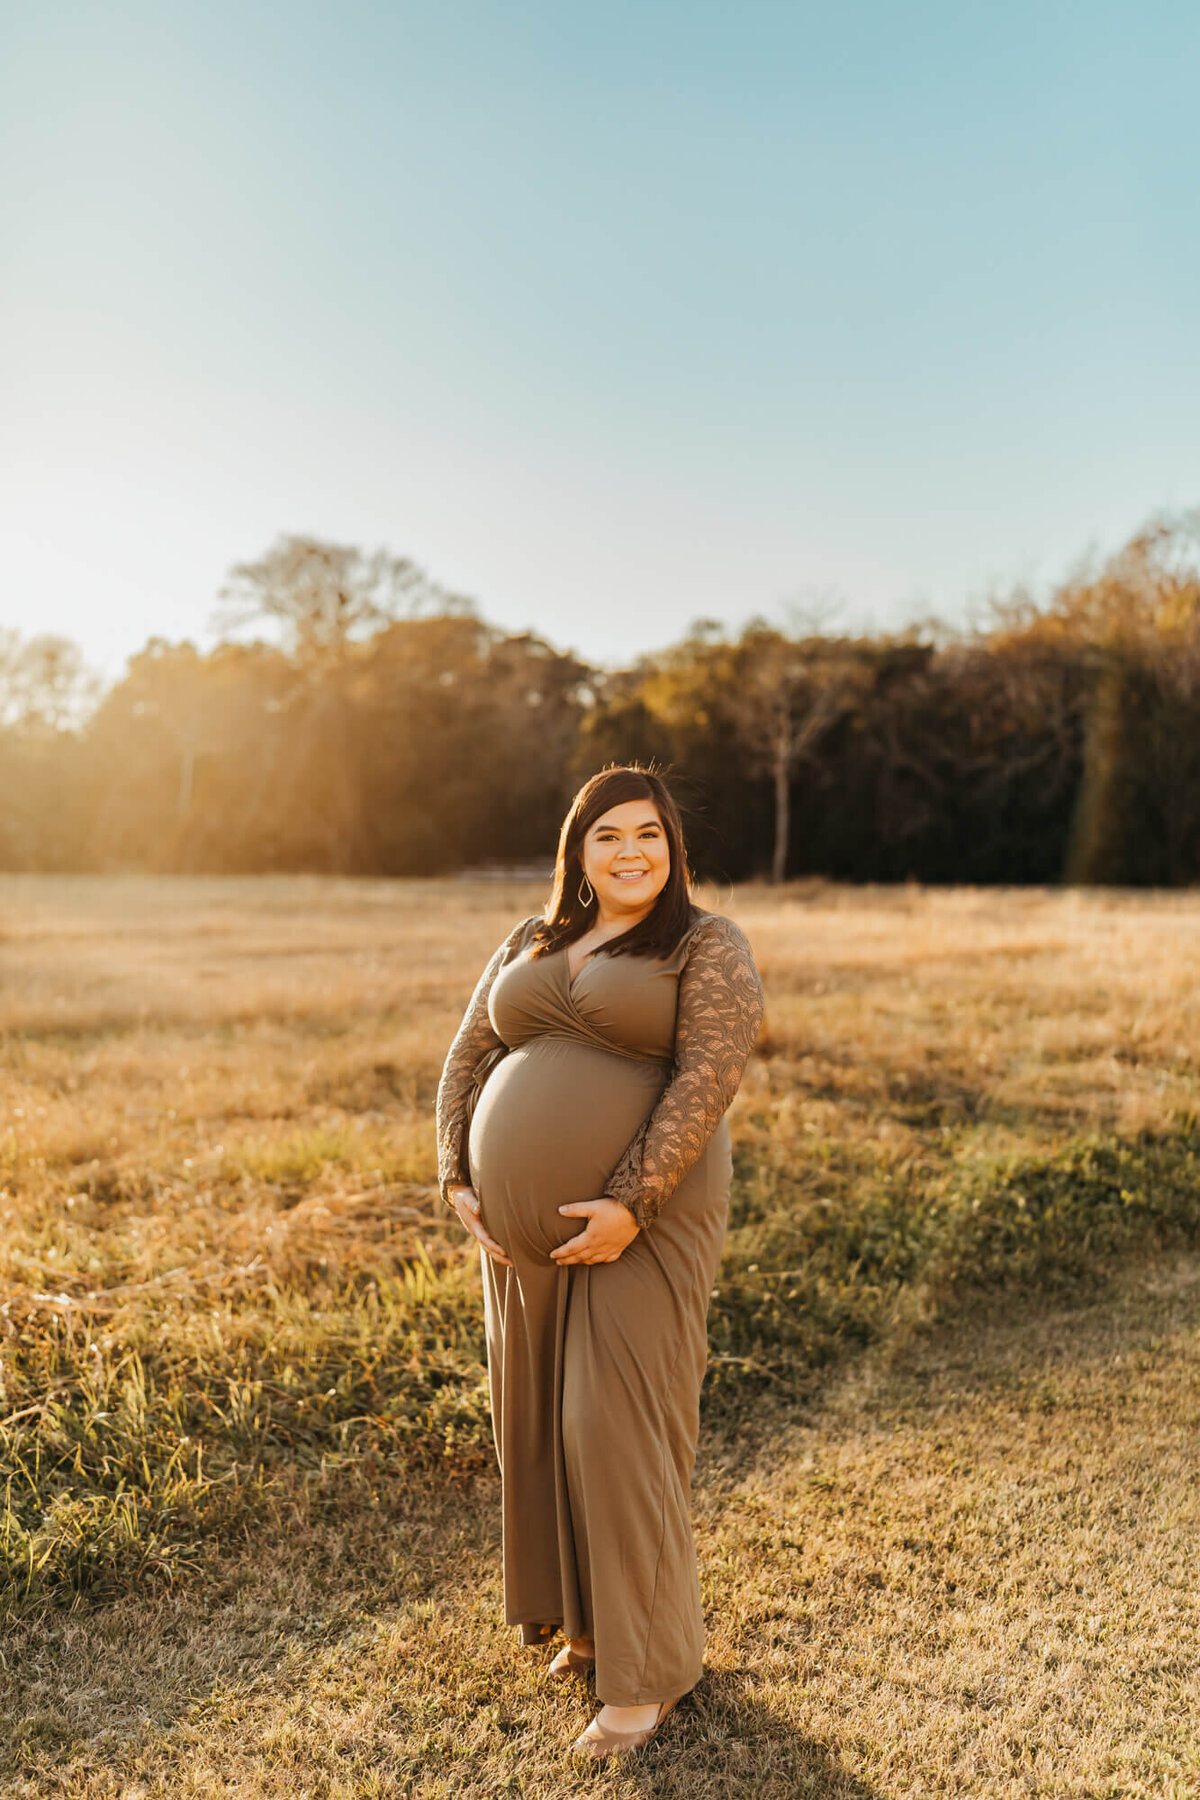 Expectant mother holding her belly in an olive lace dress in a mowed field.